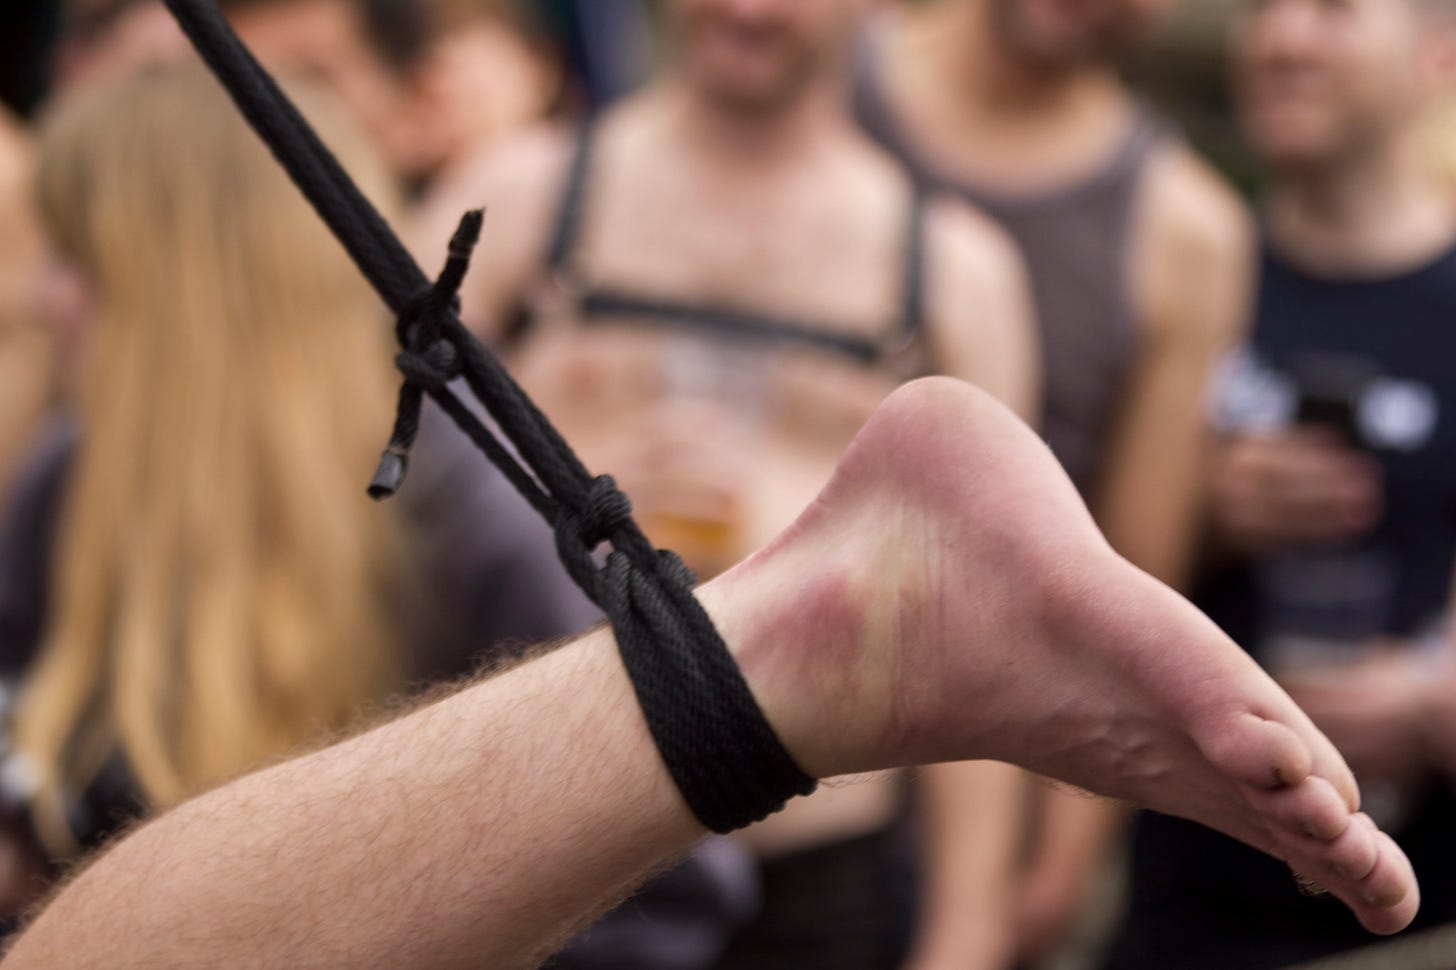 A suspended foot tied up with black rope at a Folsom Street Fair event.